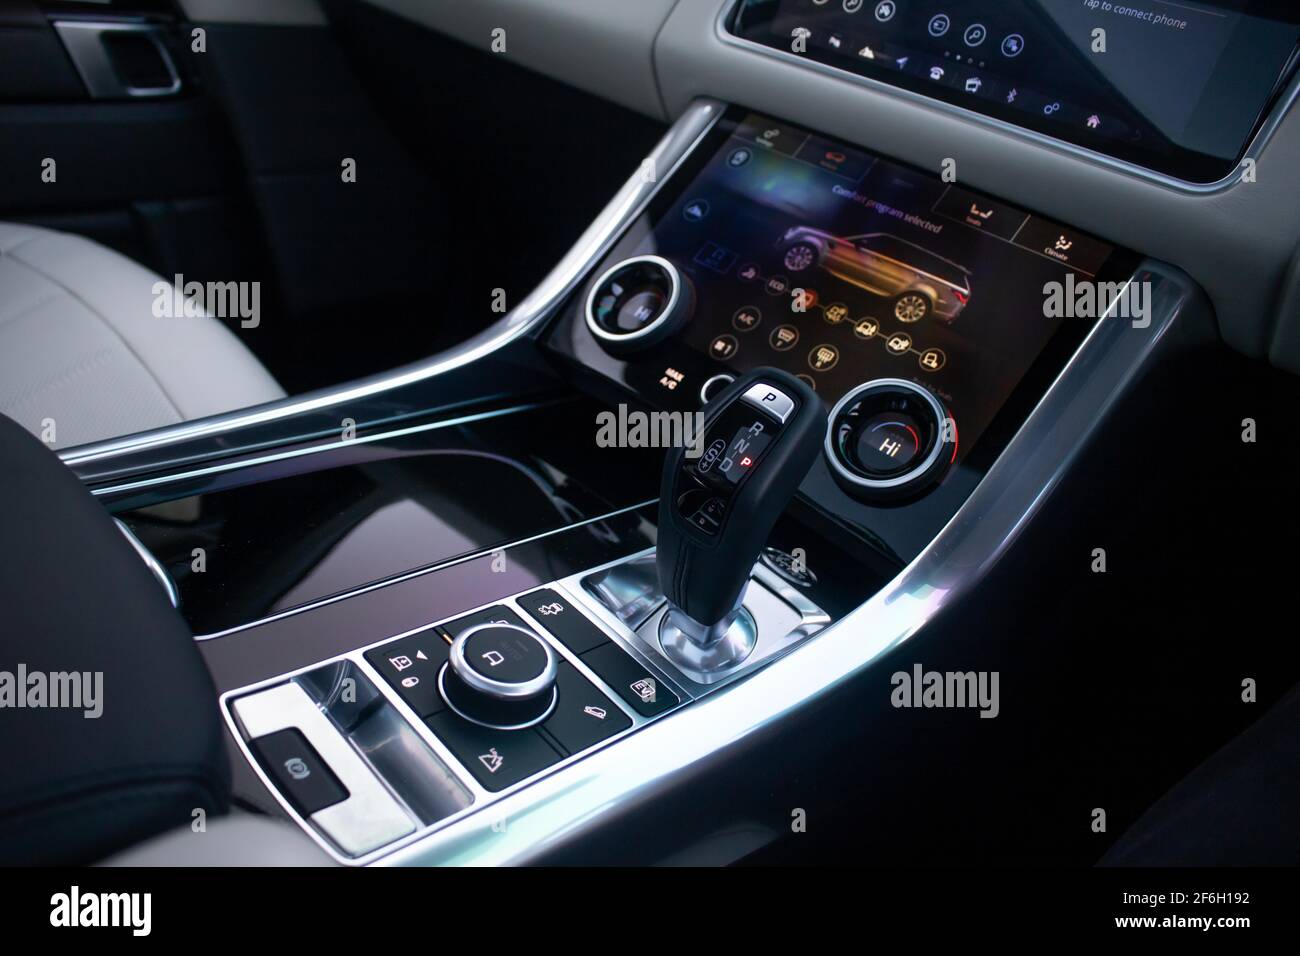 https://c8.alamy.com/comp/2F6H192/an-automatic-gear-stick-inside-the-2018-land-rover-range-rover-sport-with-gloss-black-and-cream-leather-2F6H192.jpg